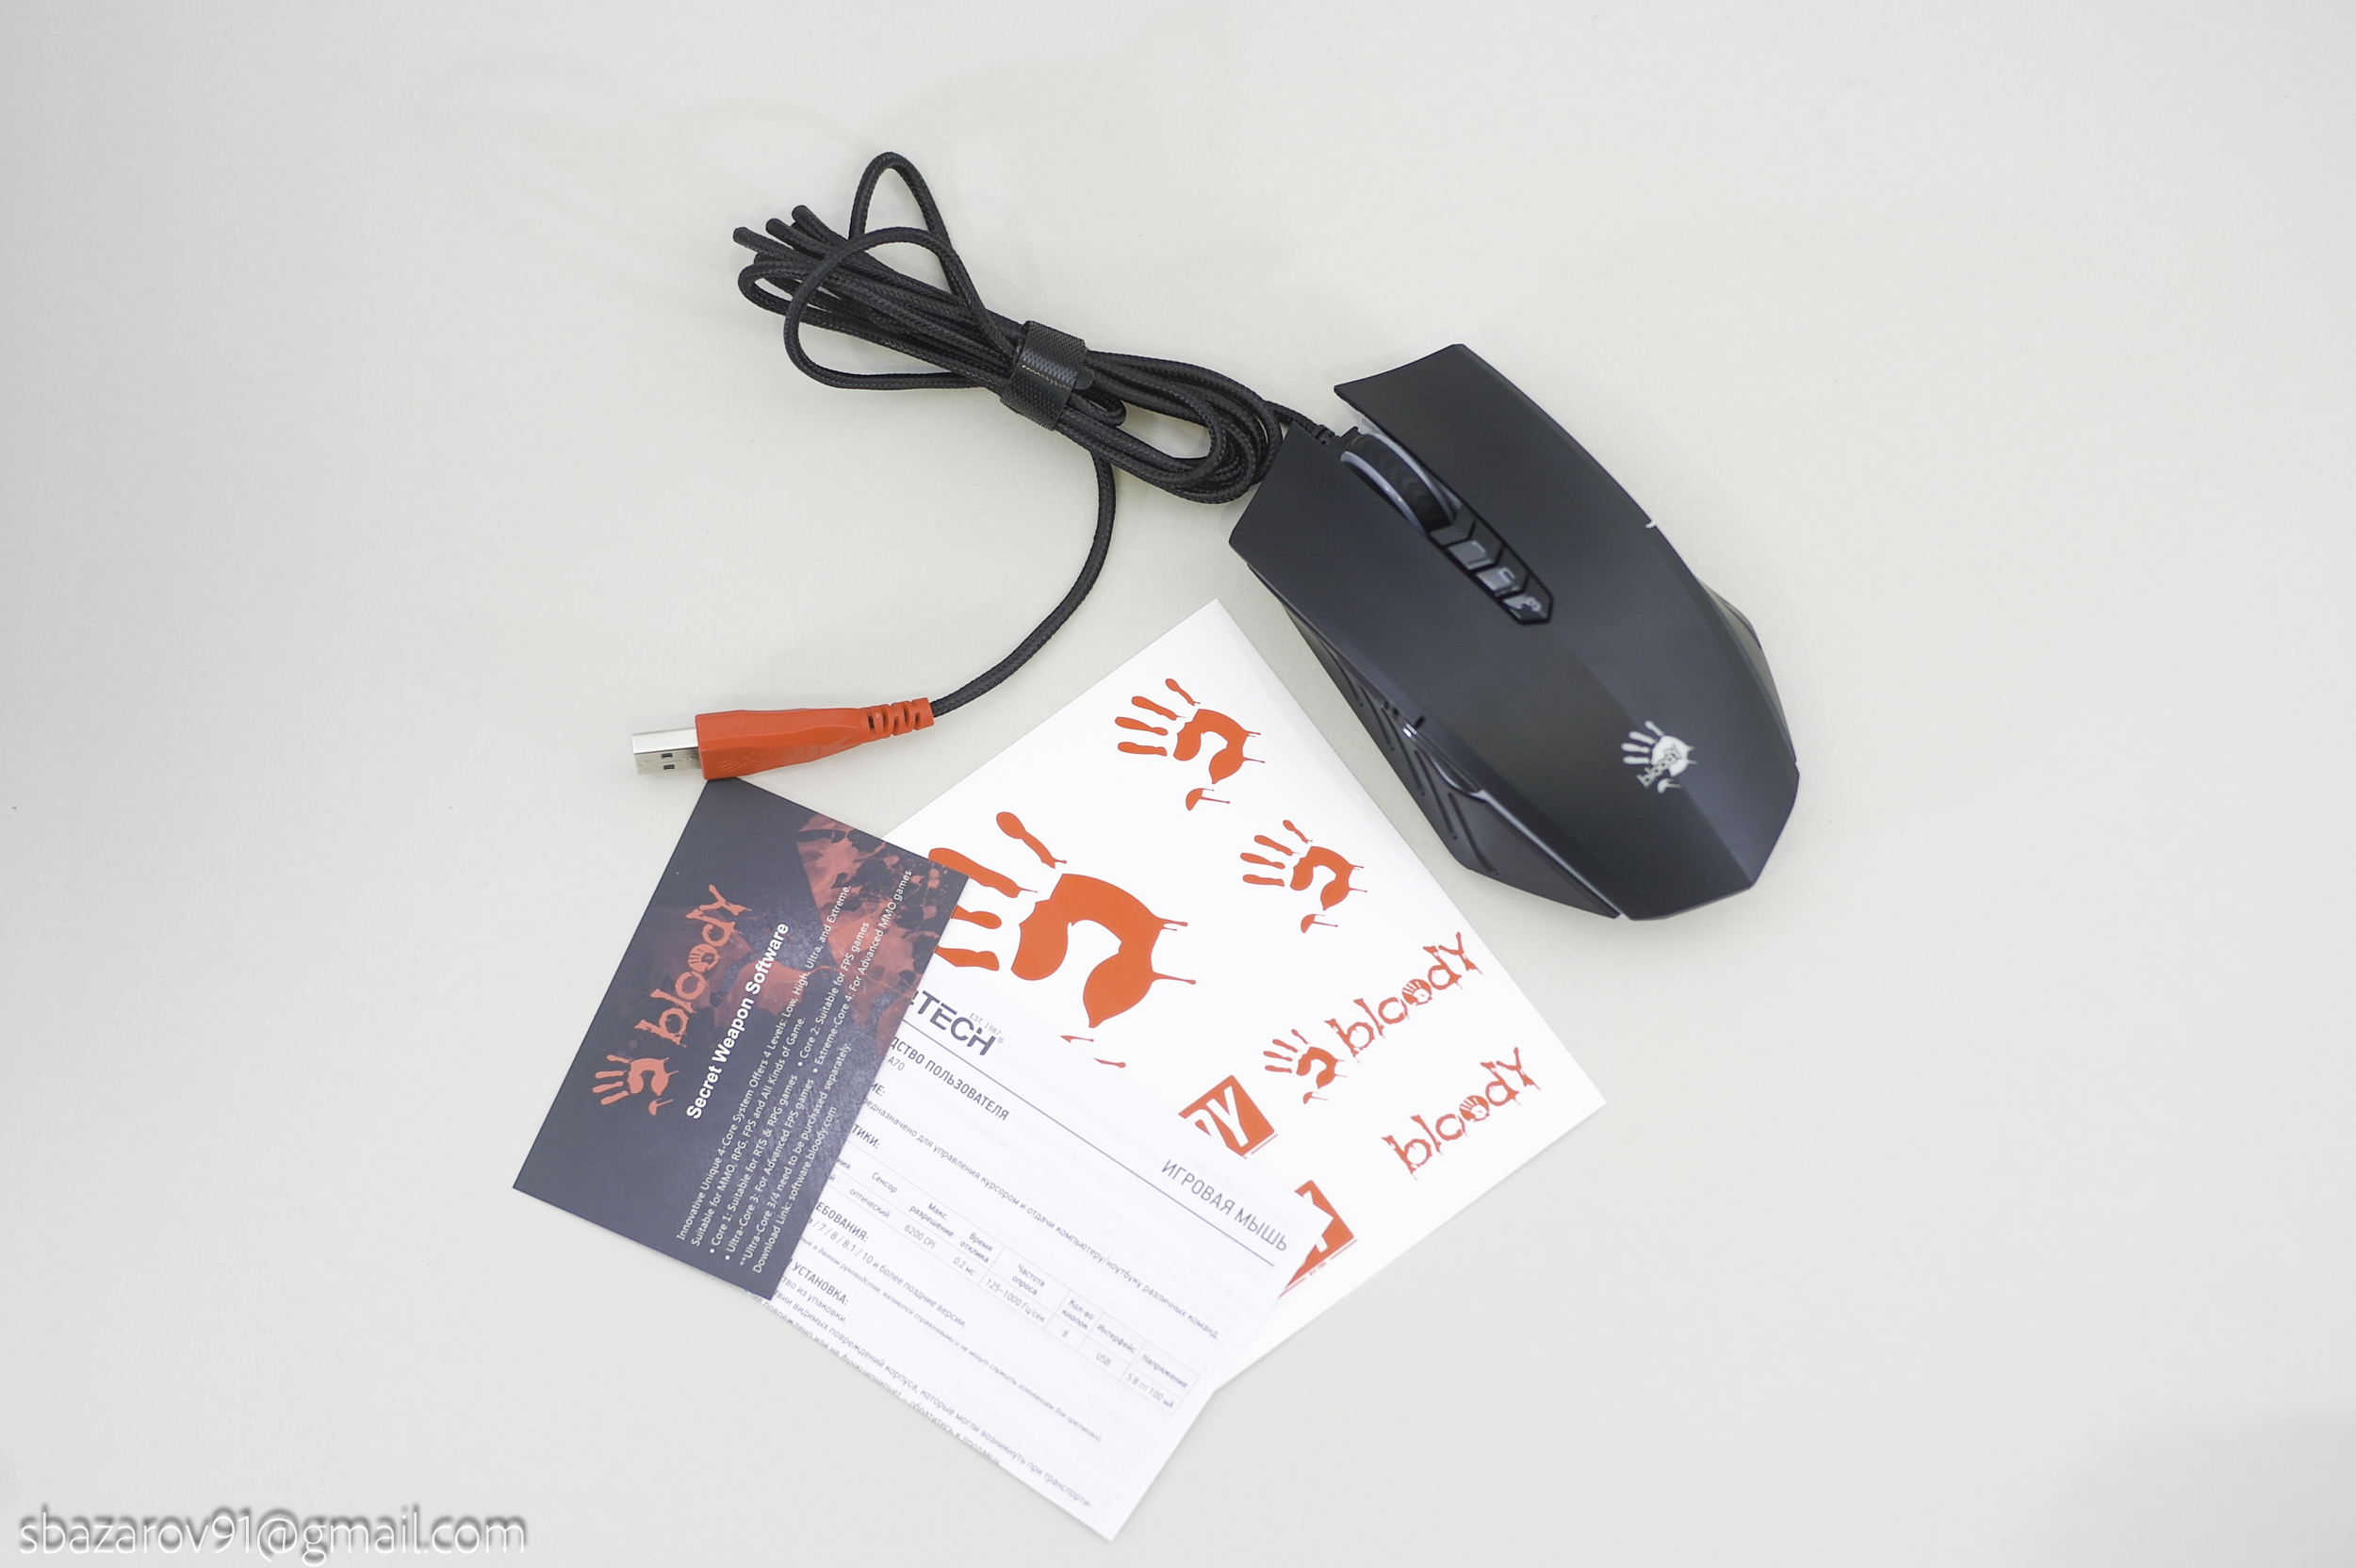 Disconnected eac blacklisted device bloody mouse a4tech rust решение 2022 фото 117